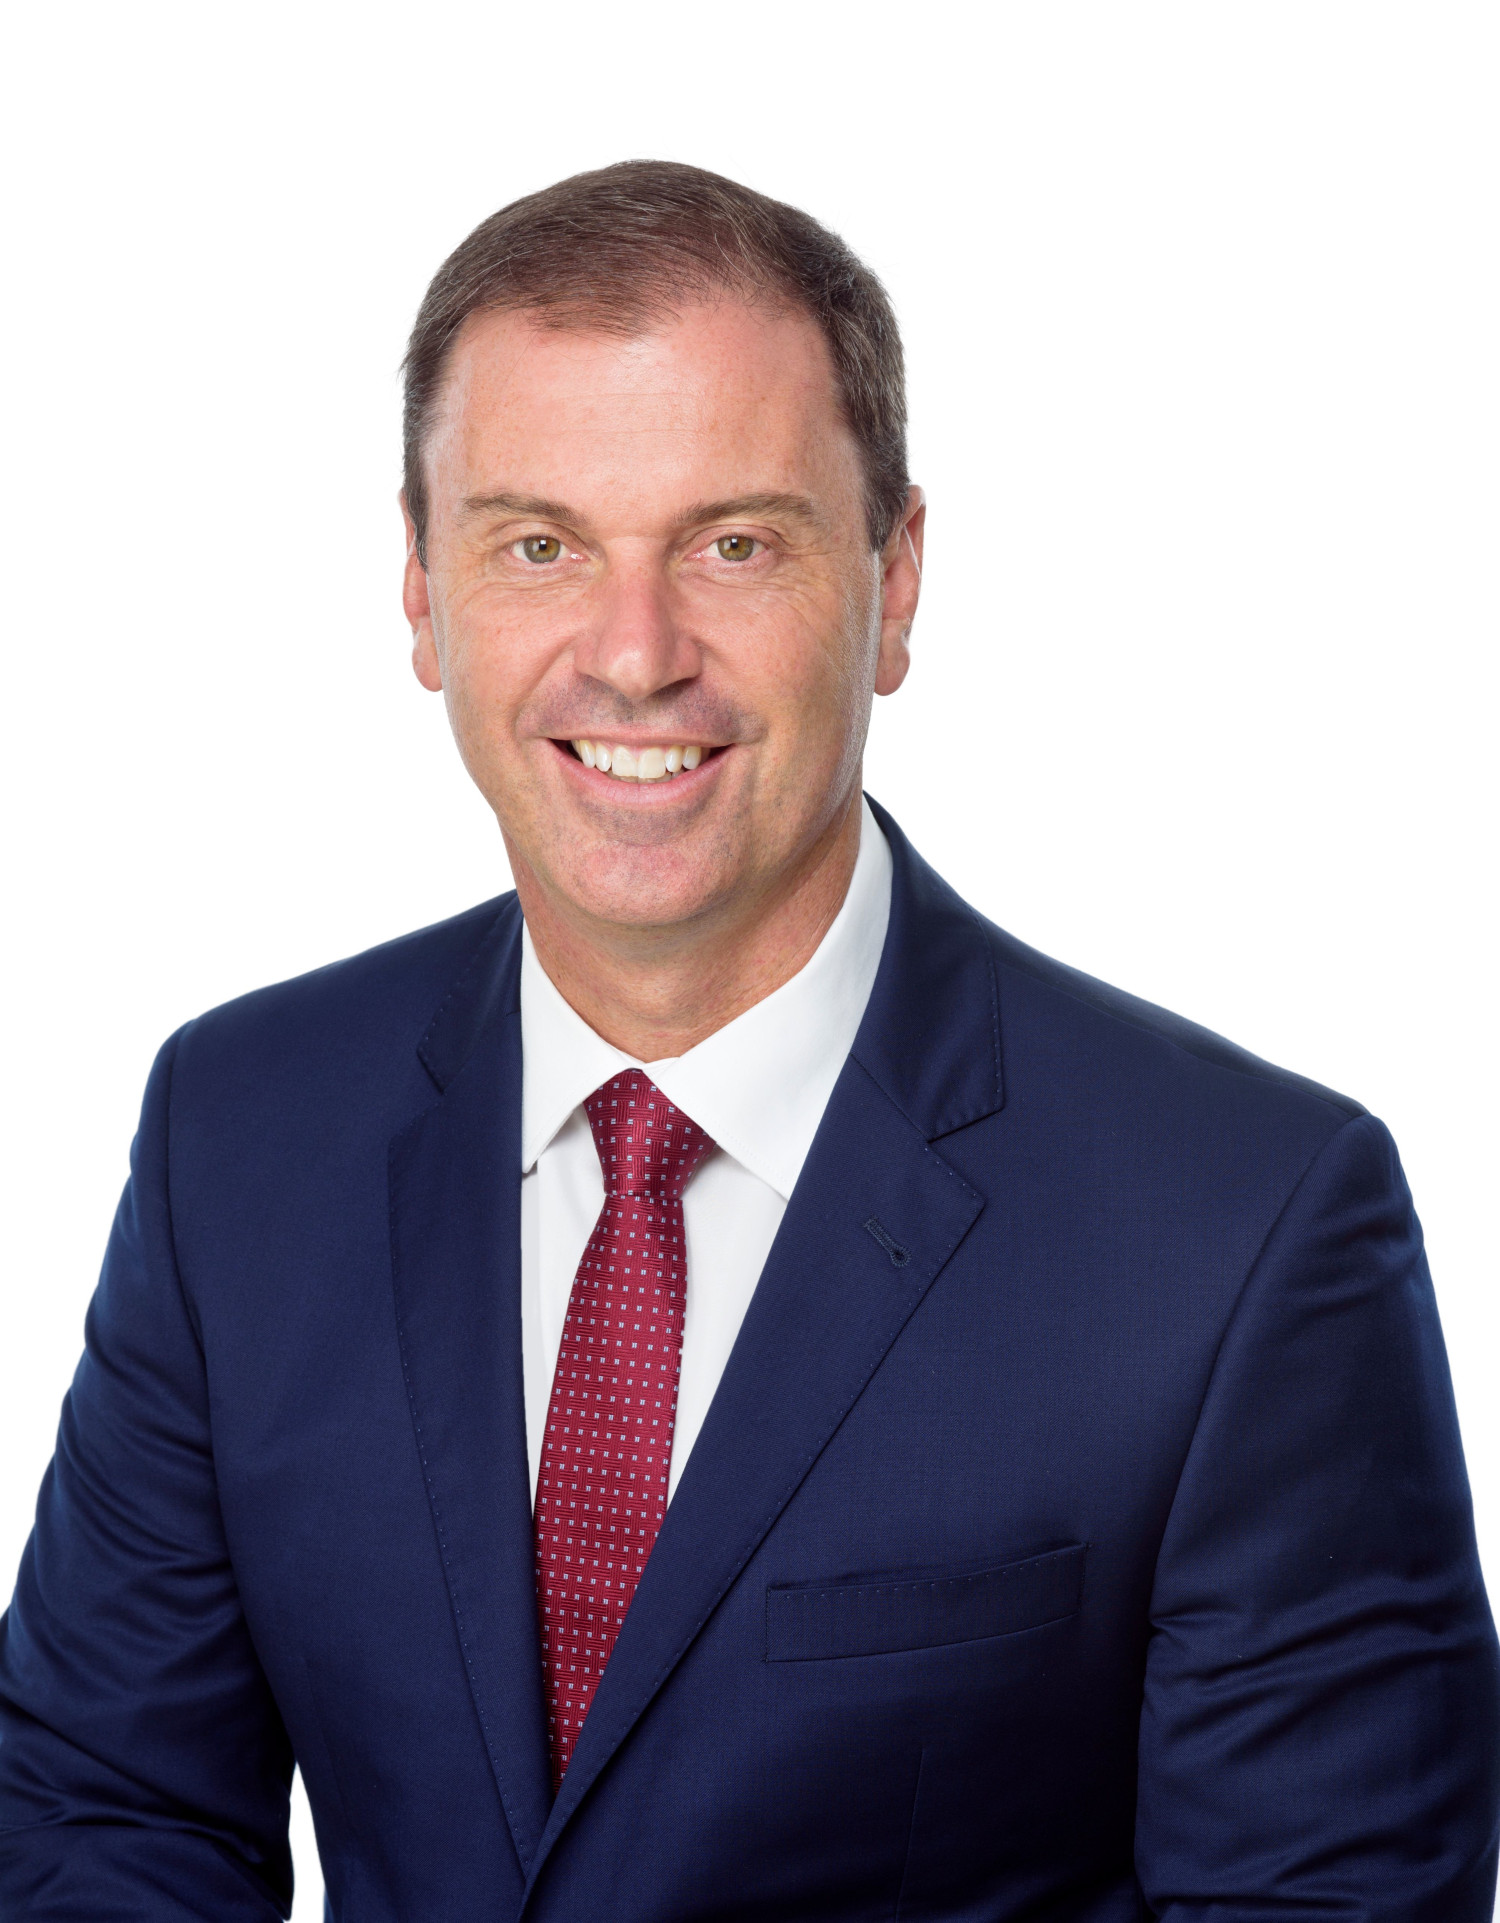 Headshot of the Minister of Creative Industries, The Hon. Colin Brooks MP